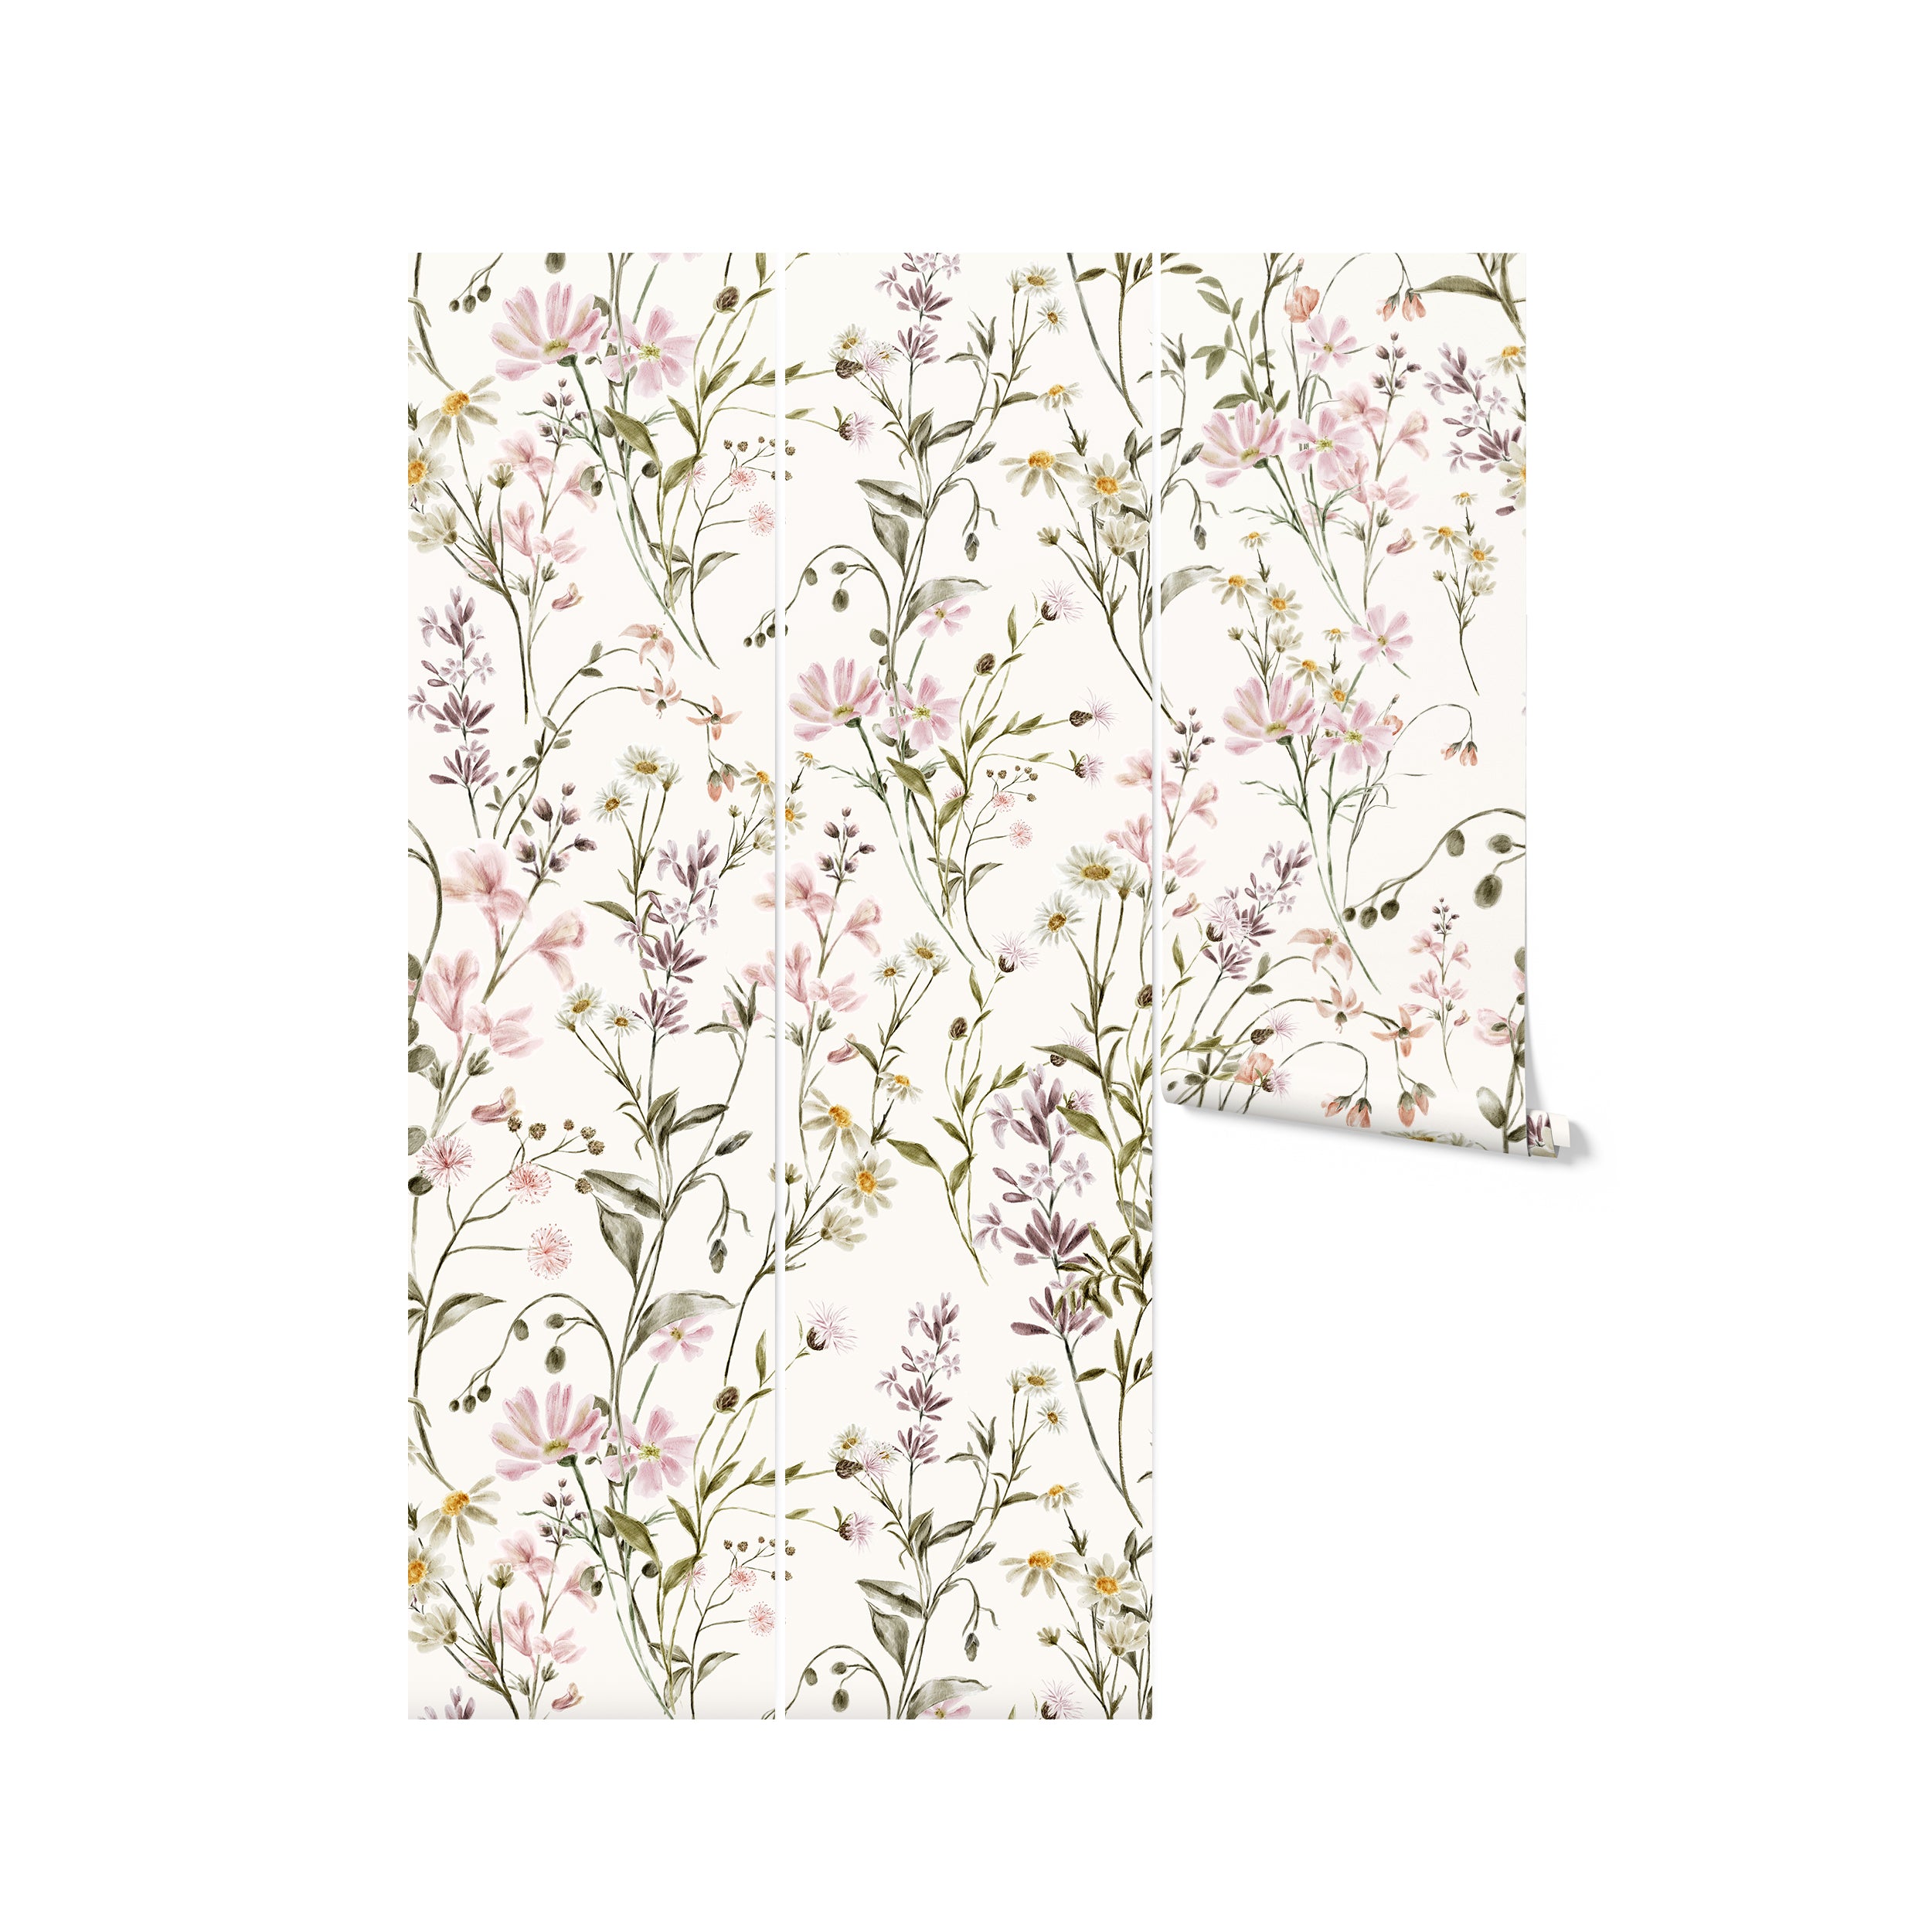 A roll of the "WildFloral Wallpaper - 75"" wallpaper is partly unrolled, showcasing the continuous floral pattern. The wallpaper's design, with its hand-painted look, promises to offer a fresh and artistic feel to any room it graces.